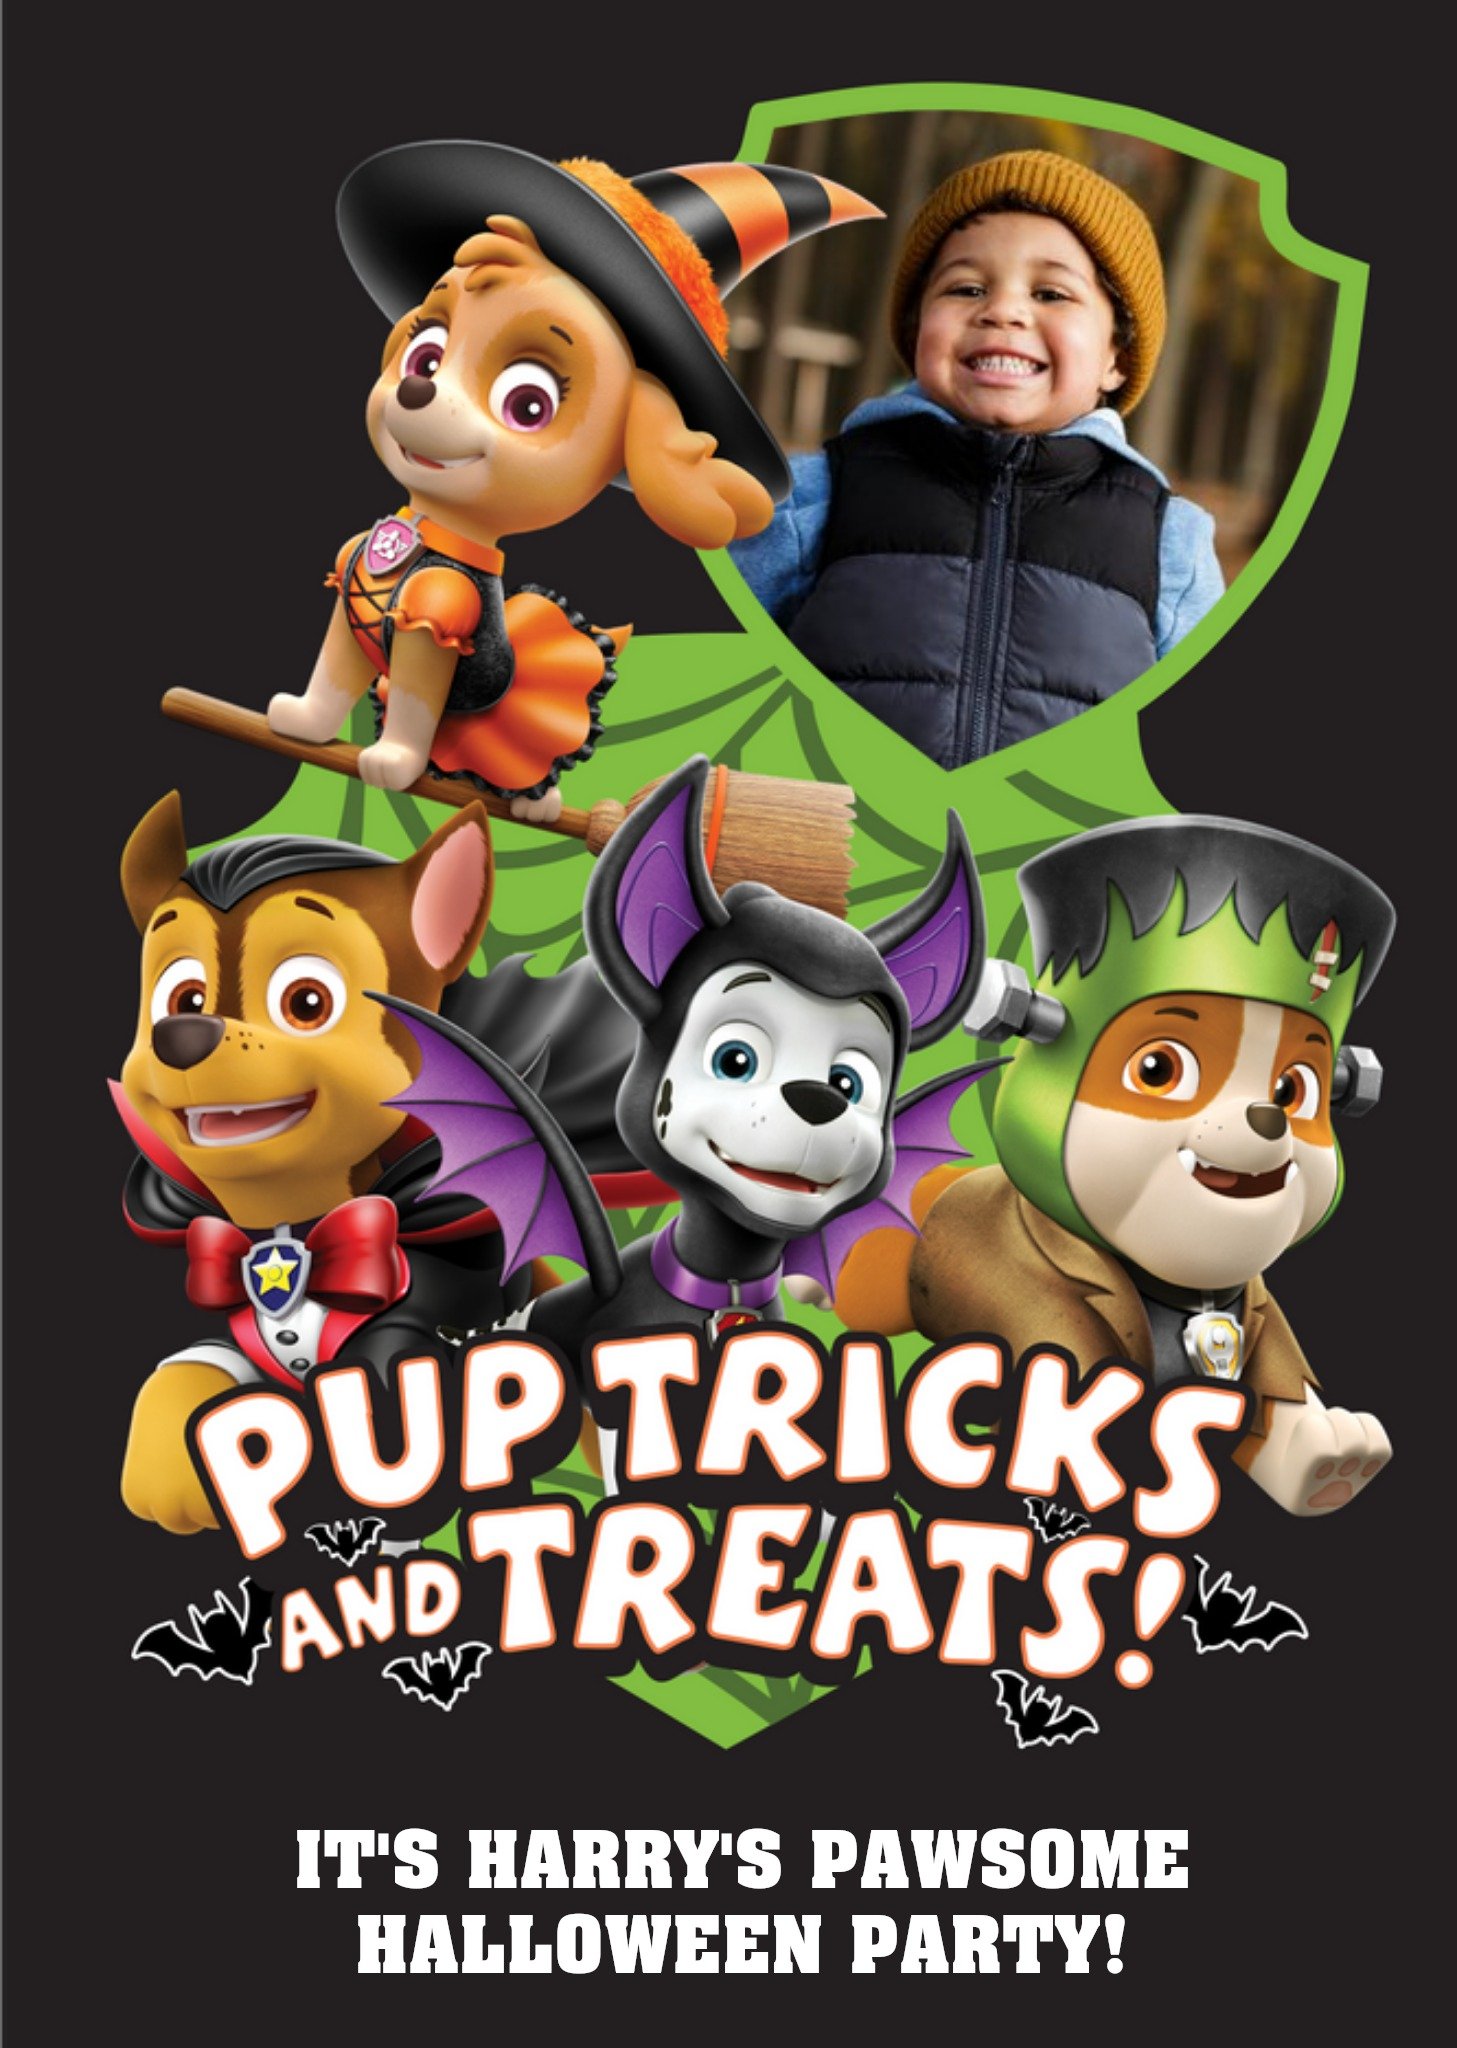 Paw Patrol Pup Tricks And Treats Personalised Halloween Party Invitation Ecard